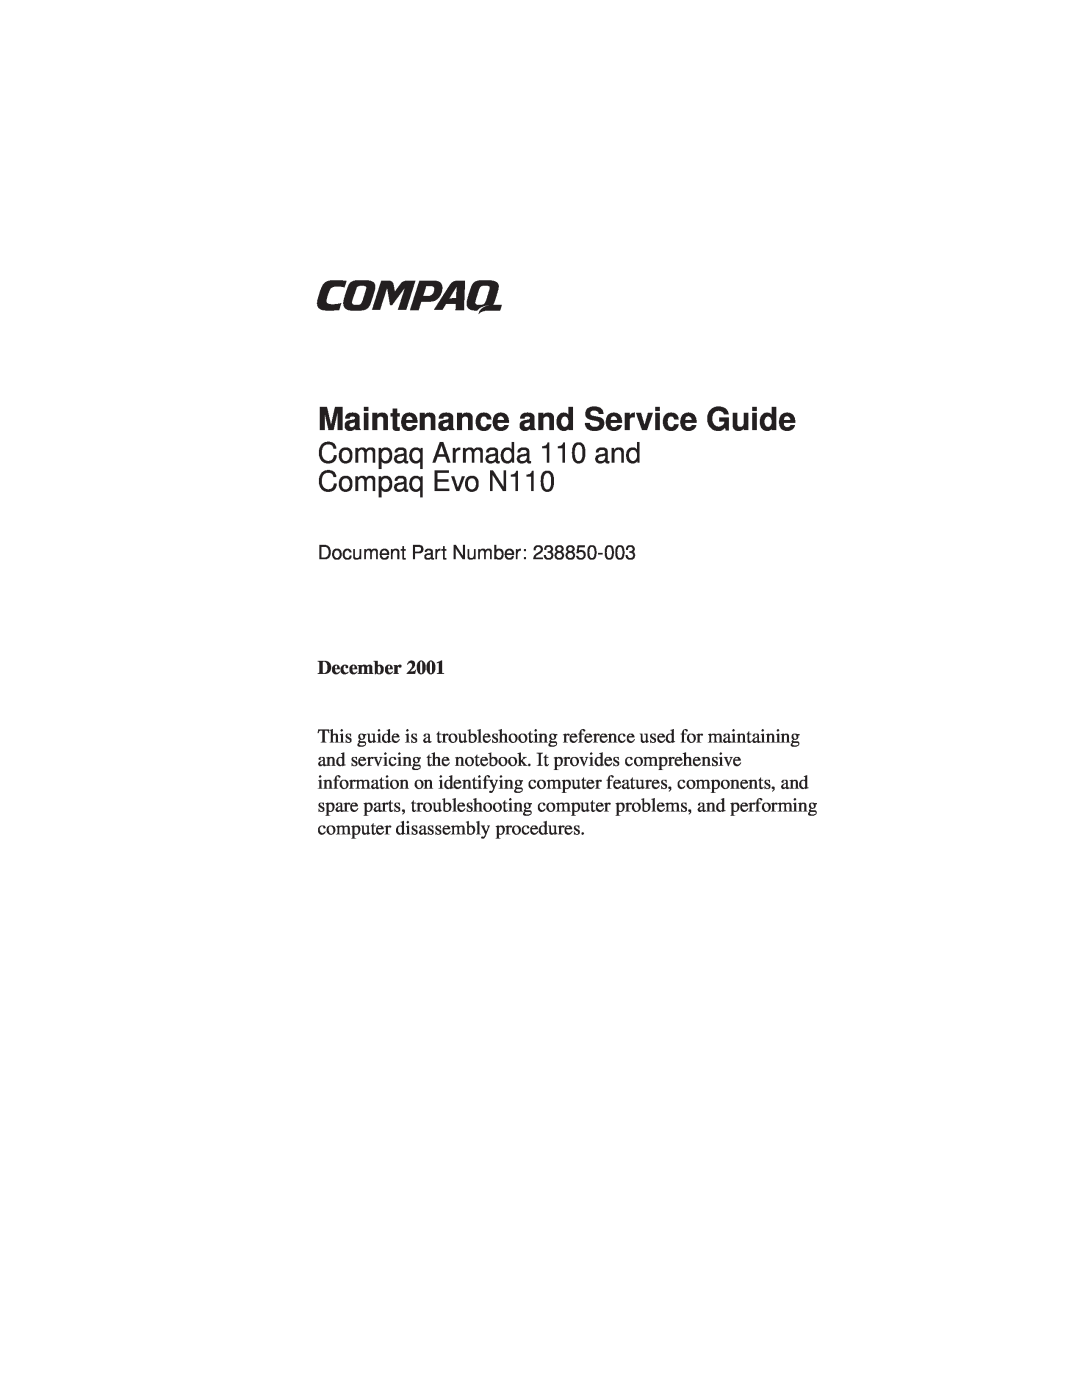 Compaq manual December, Maintenance and Service Guide, Compaq Armada 110 and Compaq Evo N110, Document Part Number 